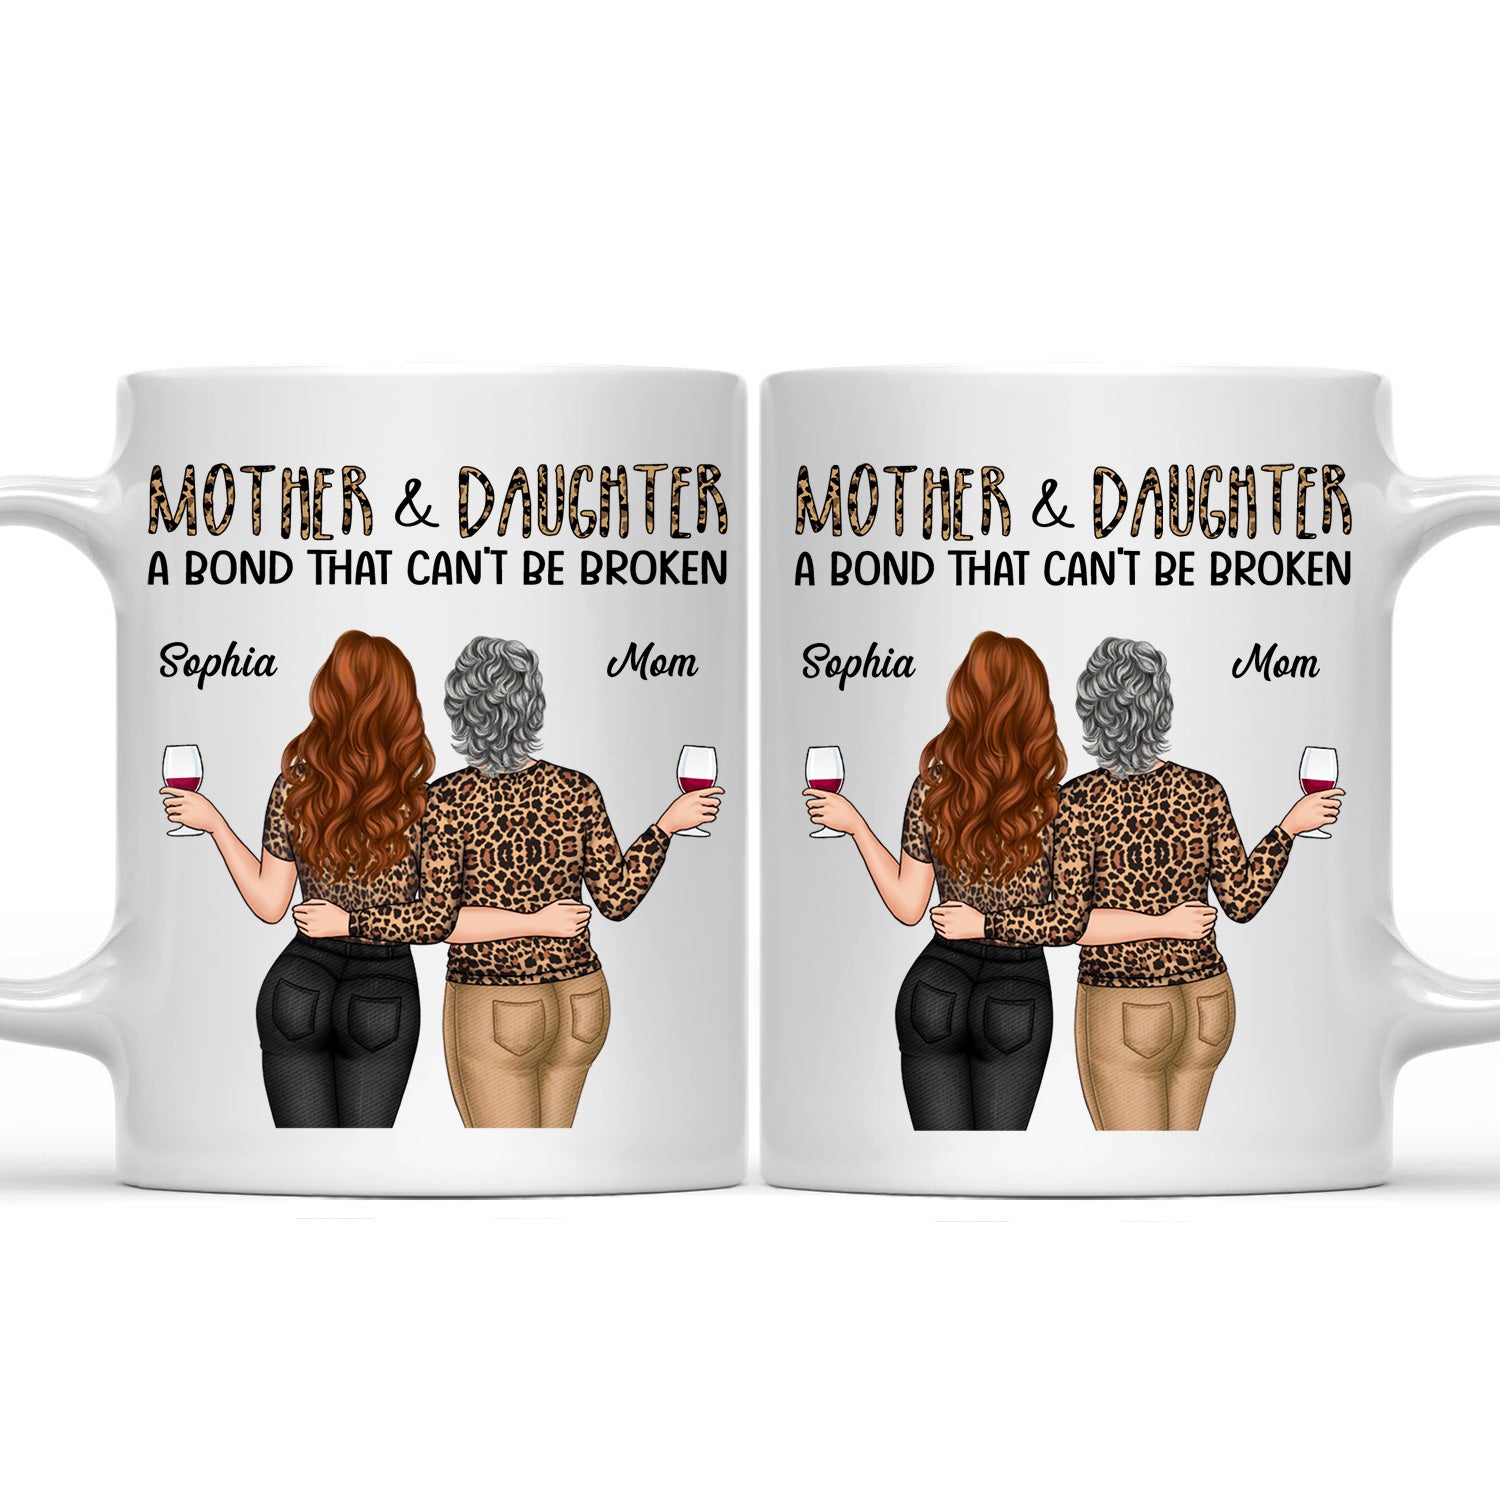 Mother & Daughter A Bond That Can't Be Broken - Gift For Mom, Mother, Grandma - Personalized Mug